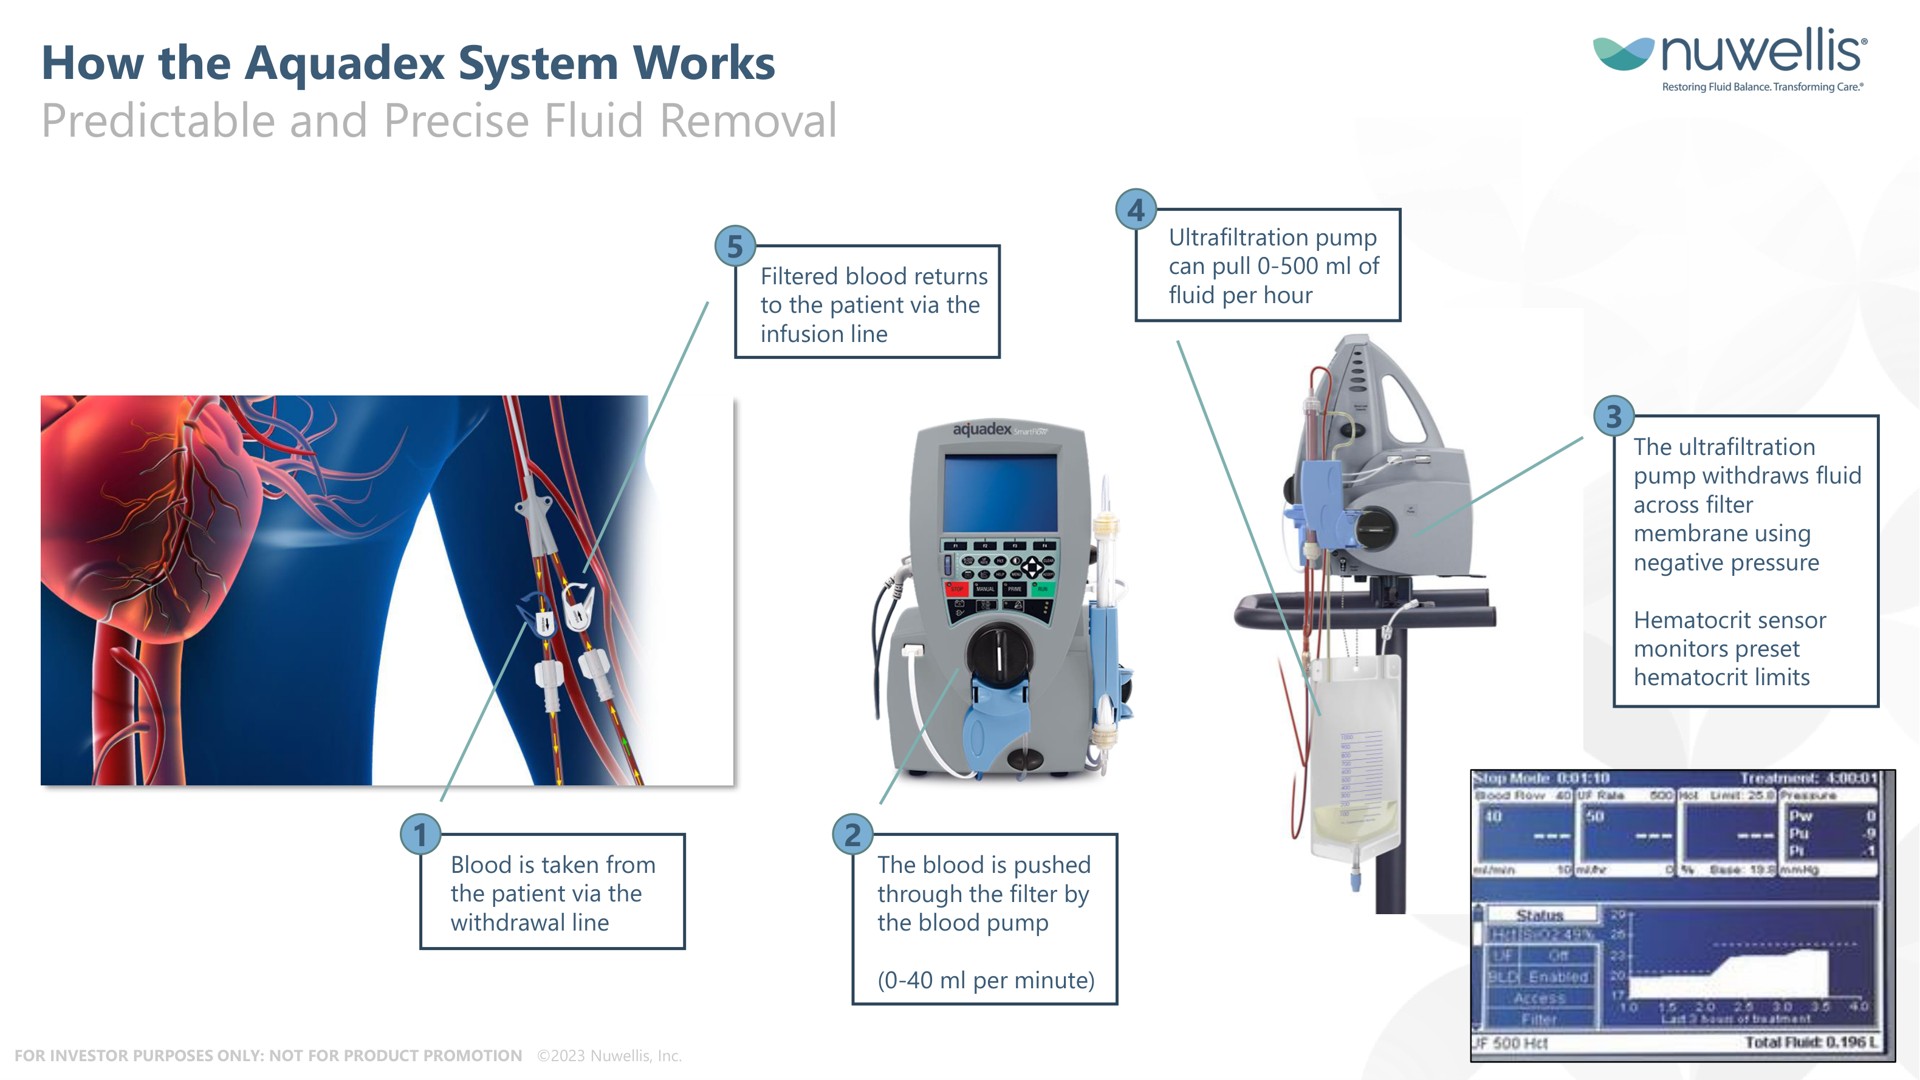 how the system works predictable and precise fluid removal | Nuwellis